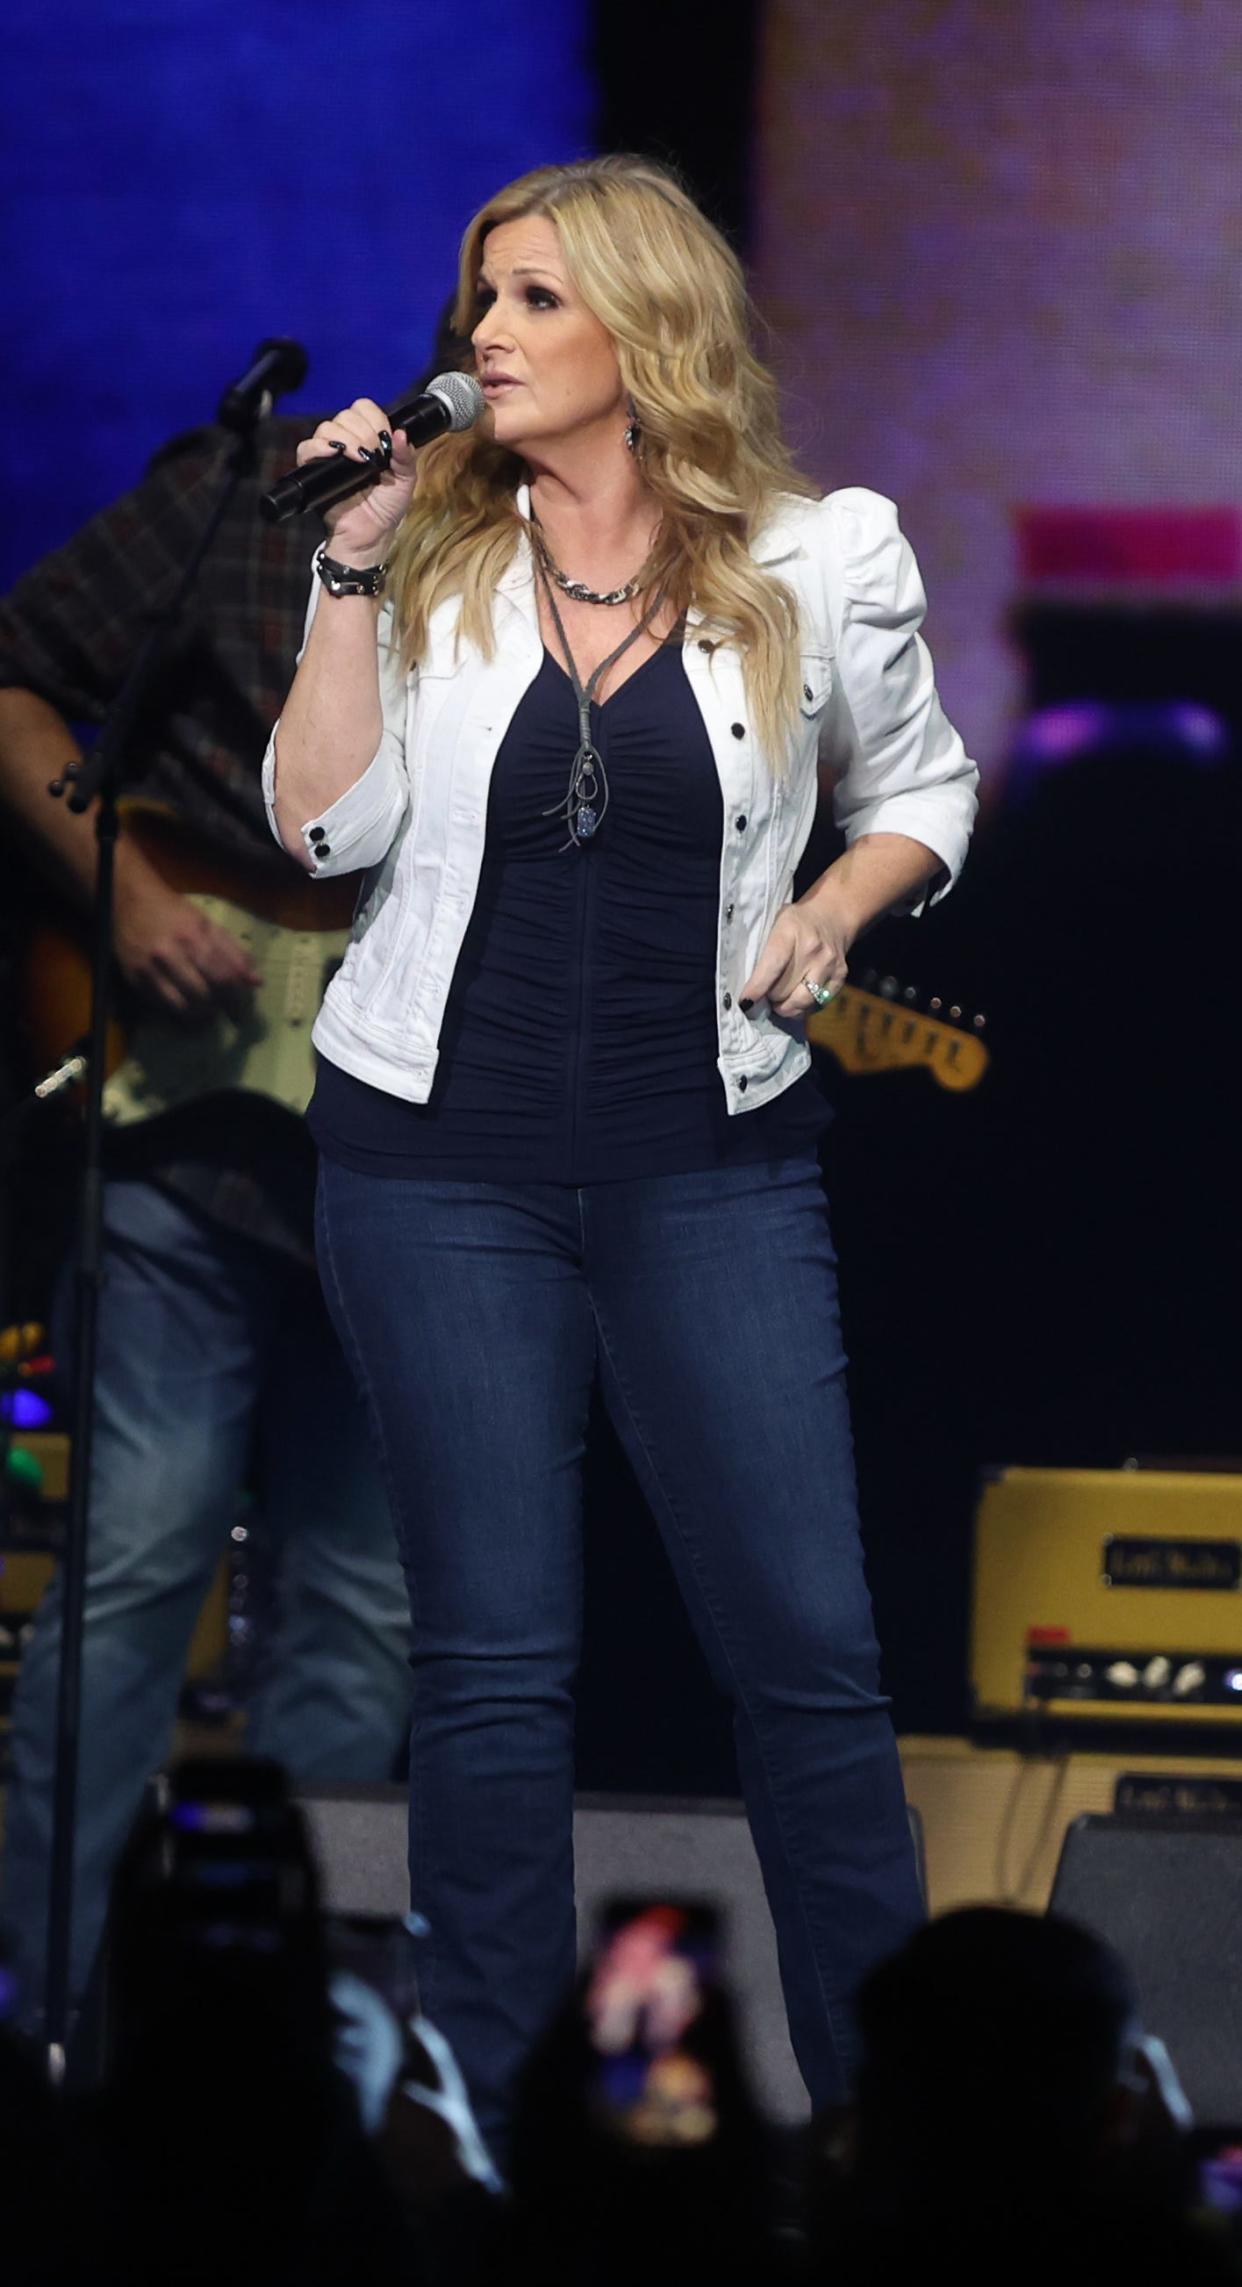 Trisha Yearwood performs during the All for the Hall concert benefitting the Country Music Hall of Fame held at Bridgestone Arena on Dec. 5, 2023.